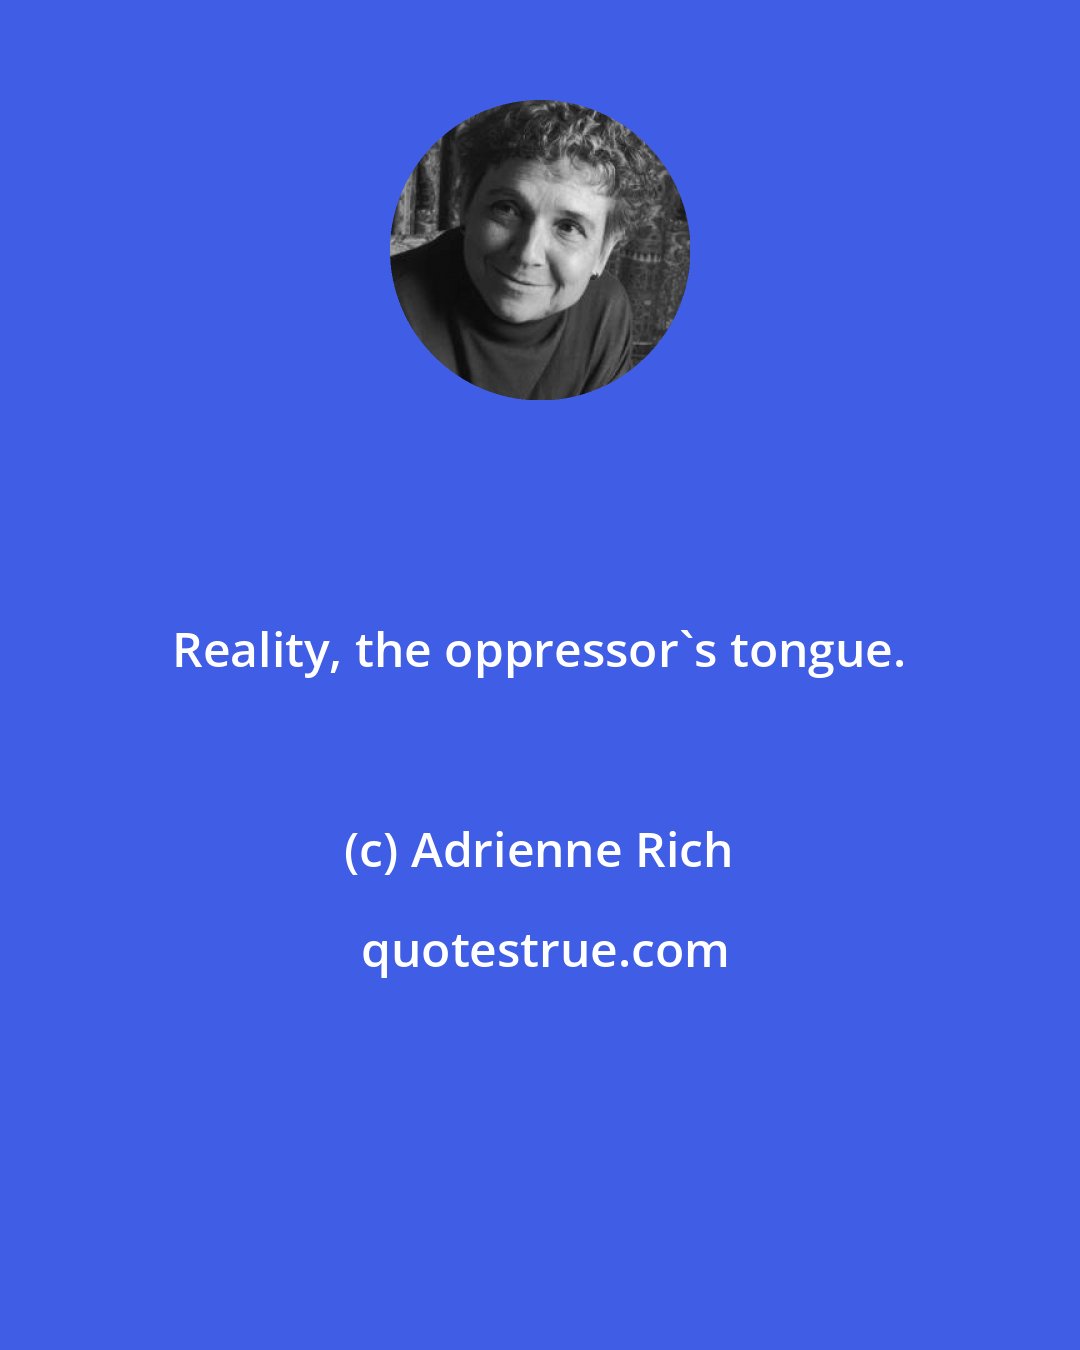 Adrienne Rich: Reality, the oppressor's tongue.